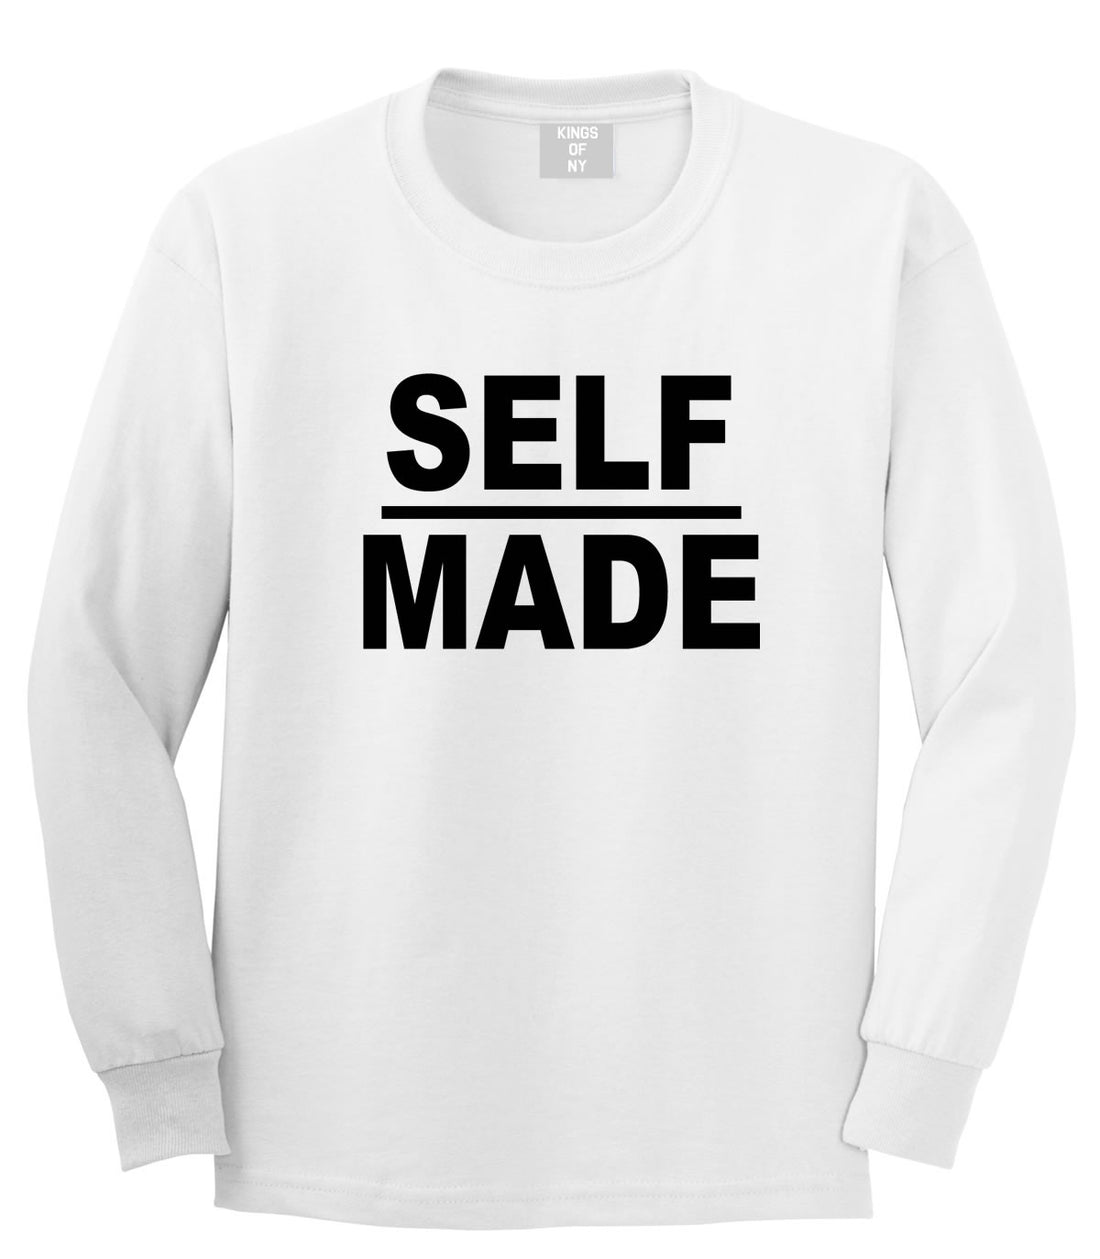 Kings Of NY Self Made Long Sleeve T-Shirt in White